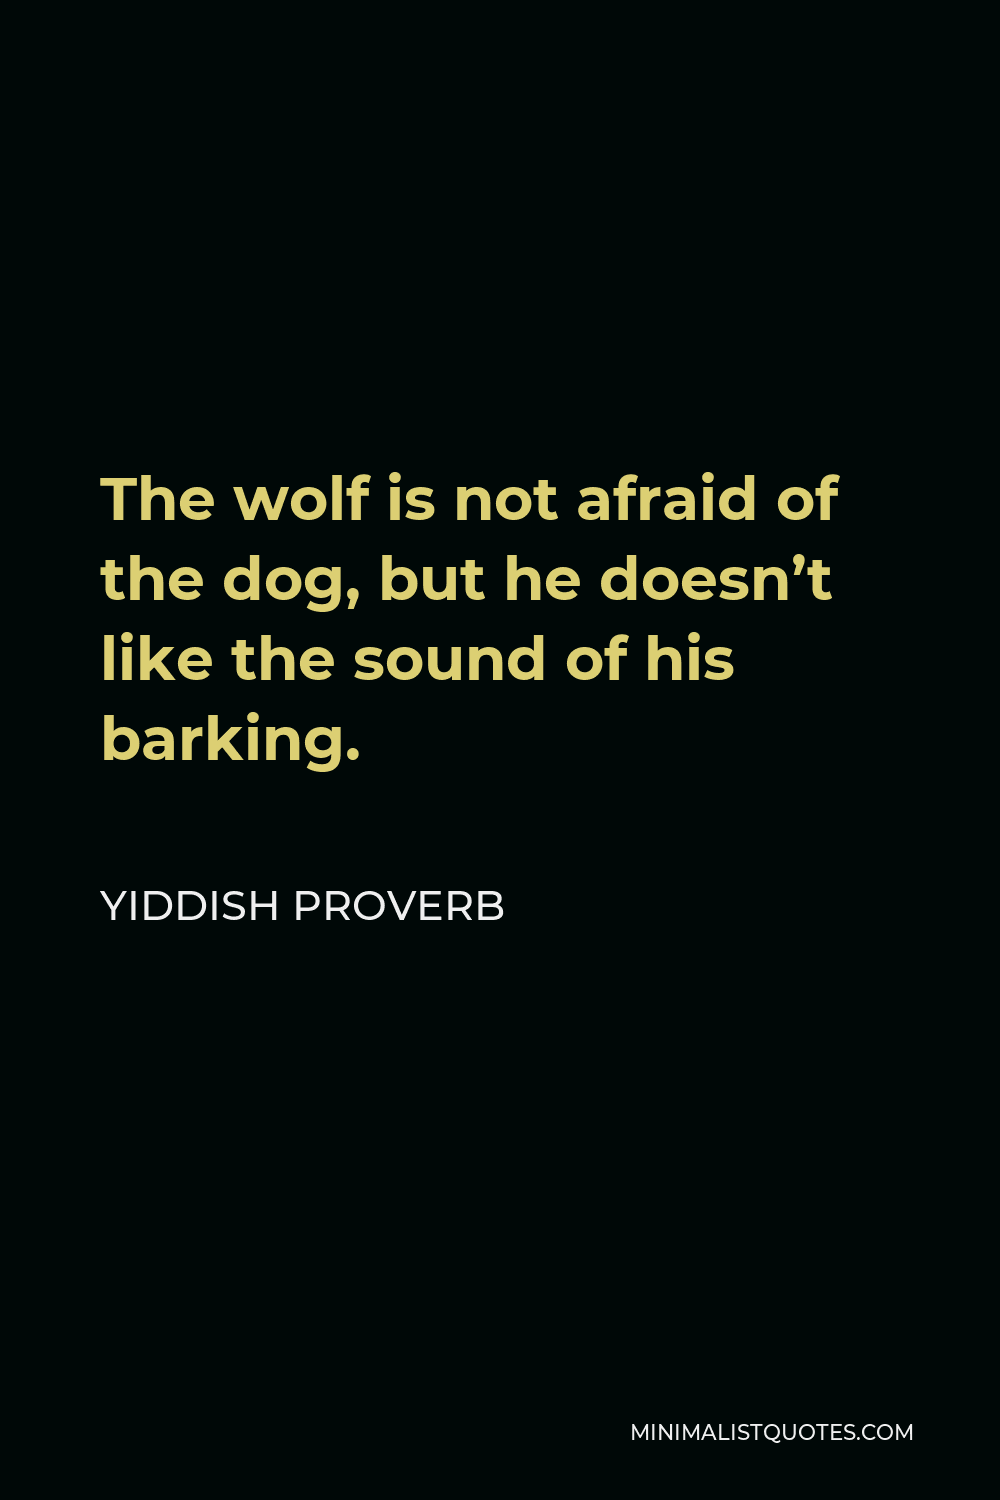 Yiddish Proverb Quote - The wolf is not afraid of the dog, but he doesn’t like the sound of his barking.